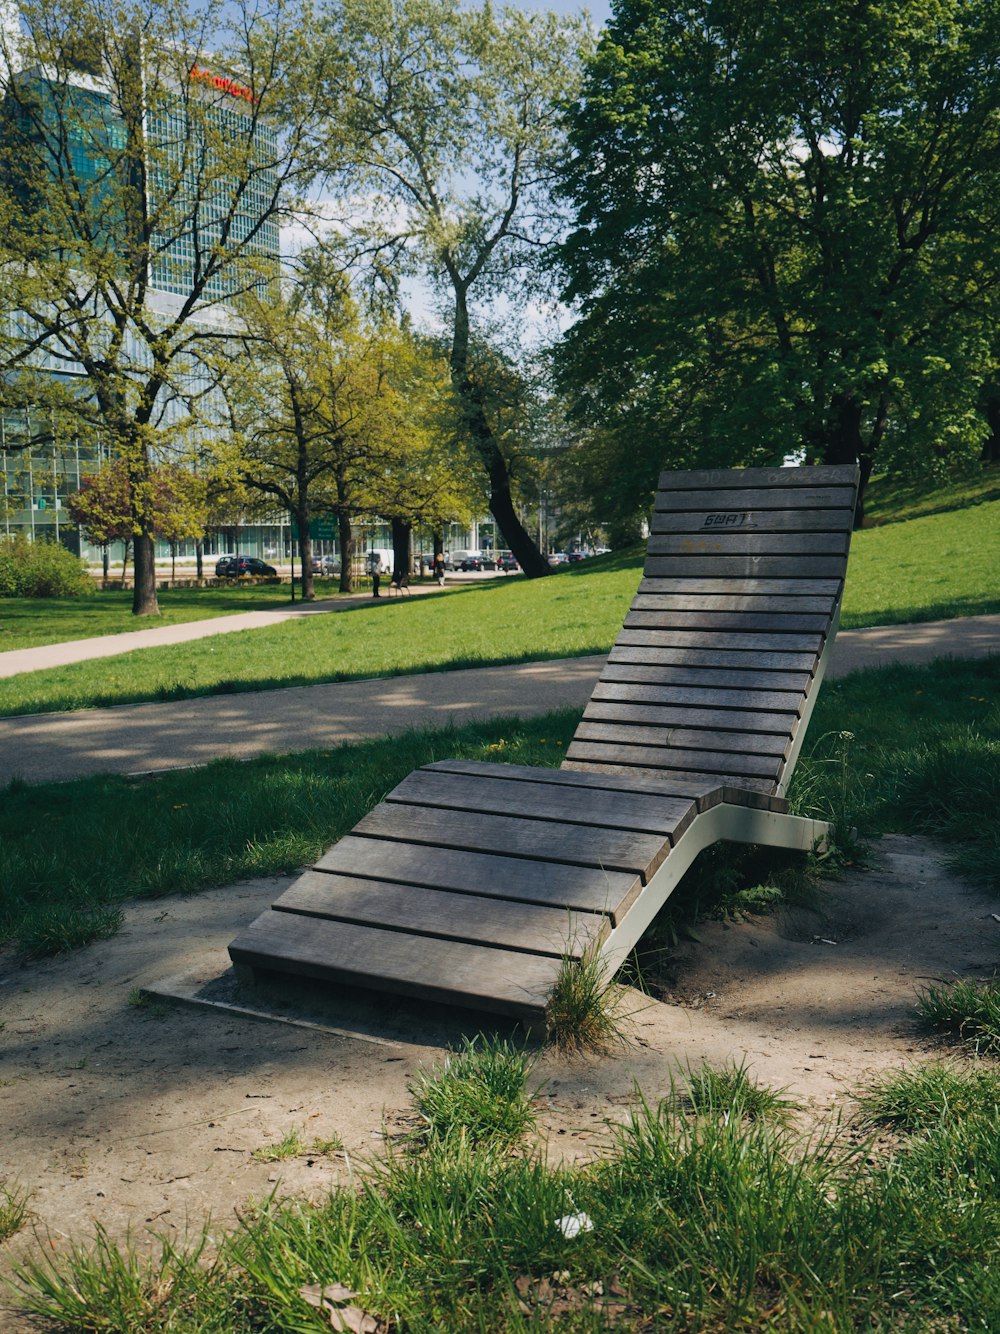 a wooden bench sitting in the middle of a park